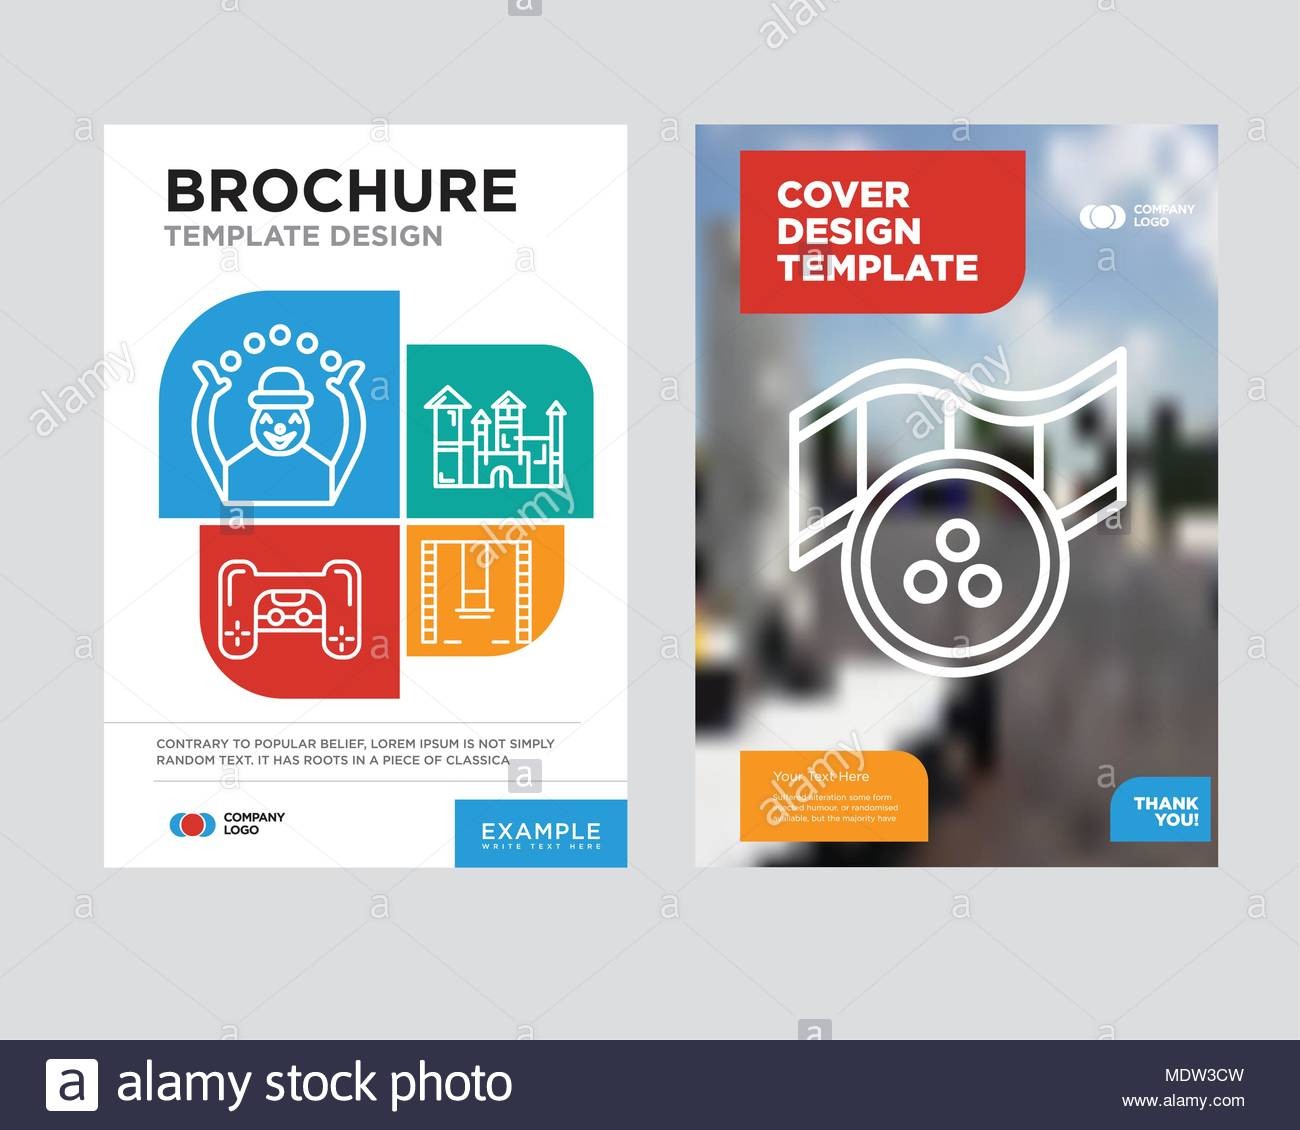 Movie Brochure Flyer Design Template With Abstract Photo